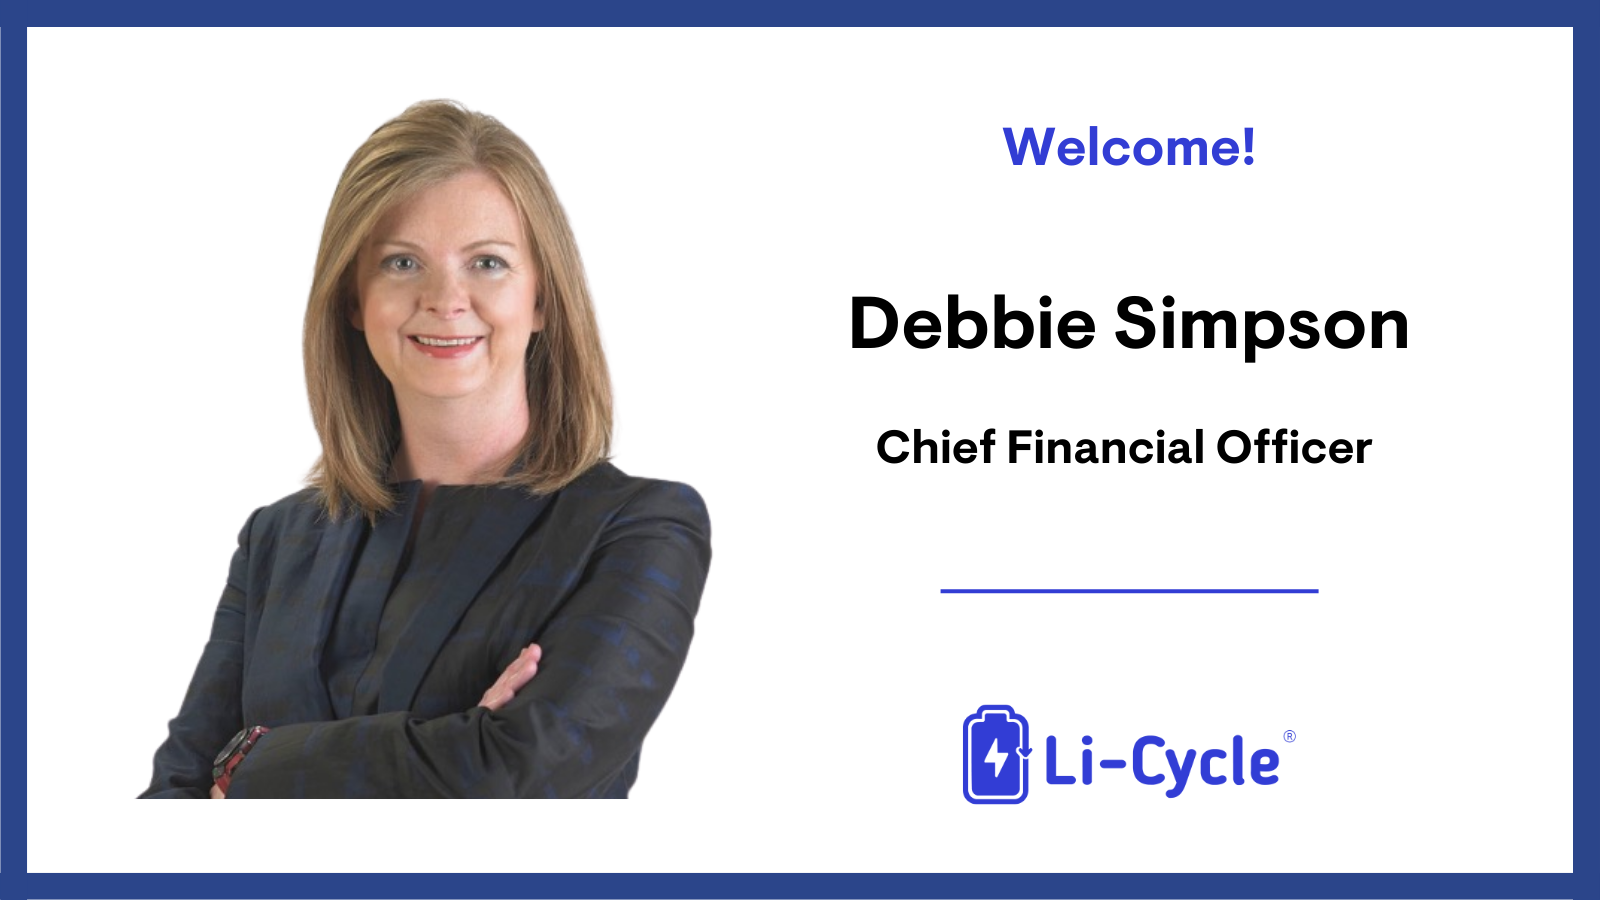 Debbie Simpson, Chief Financial Officer at Li-Cycle